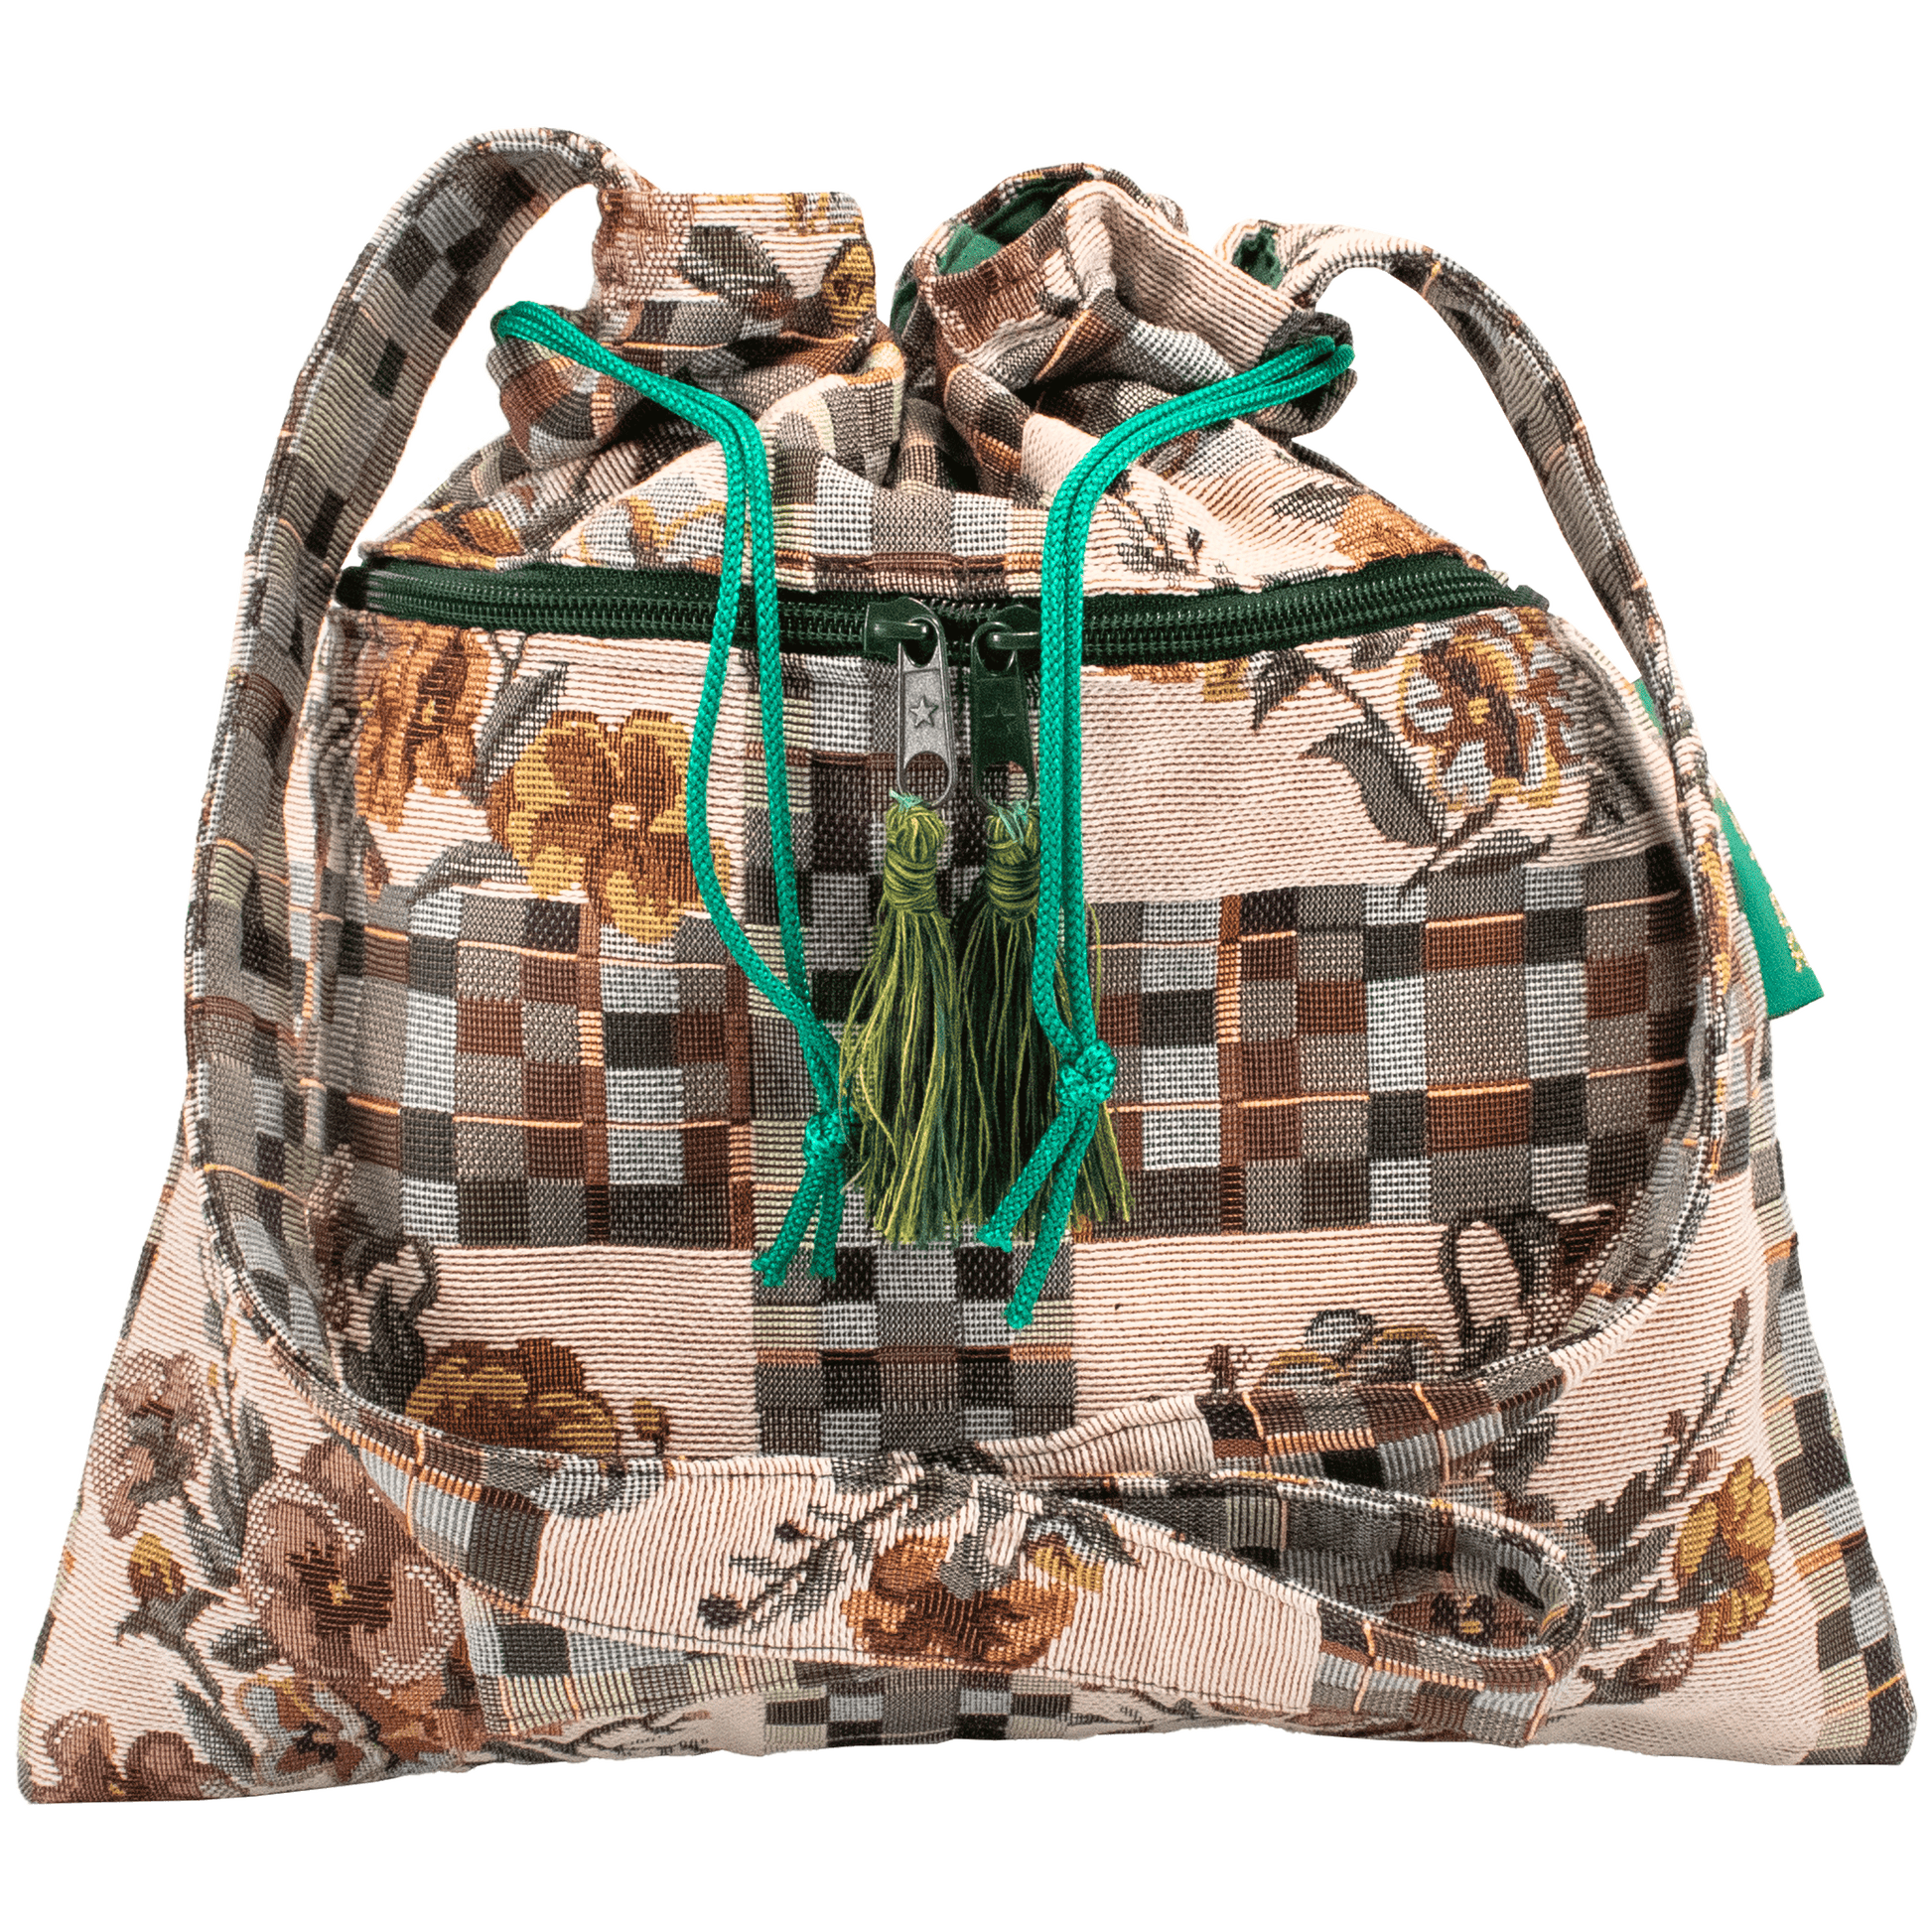 Medium drawstring purse with earthy an green checker and floral pattern